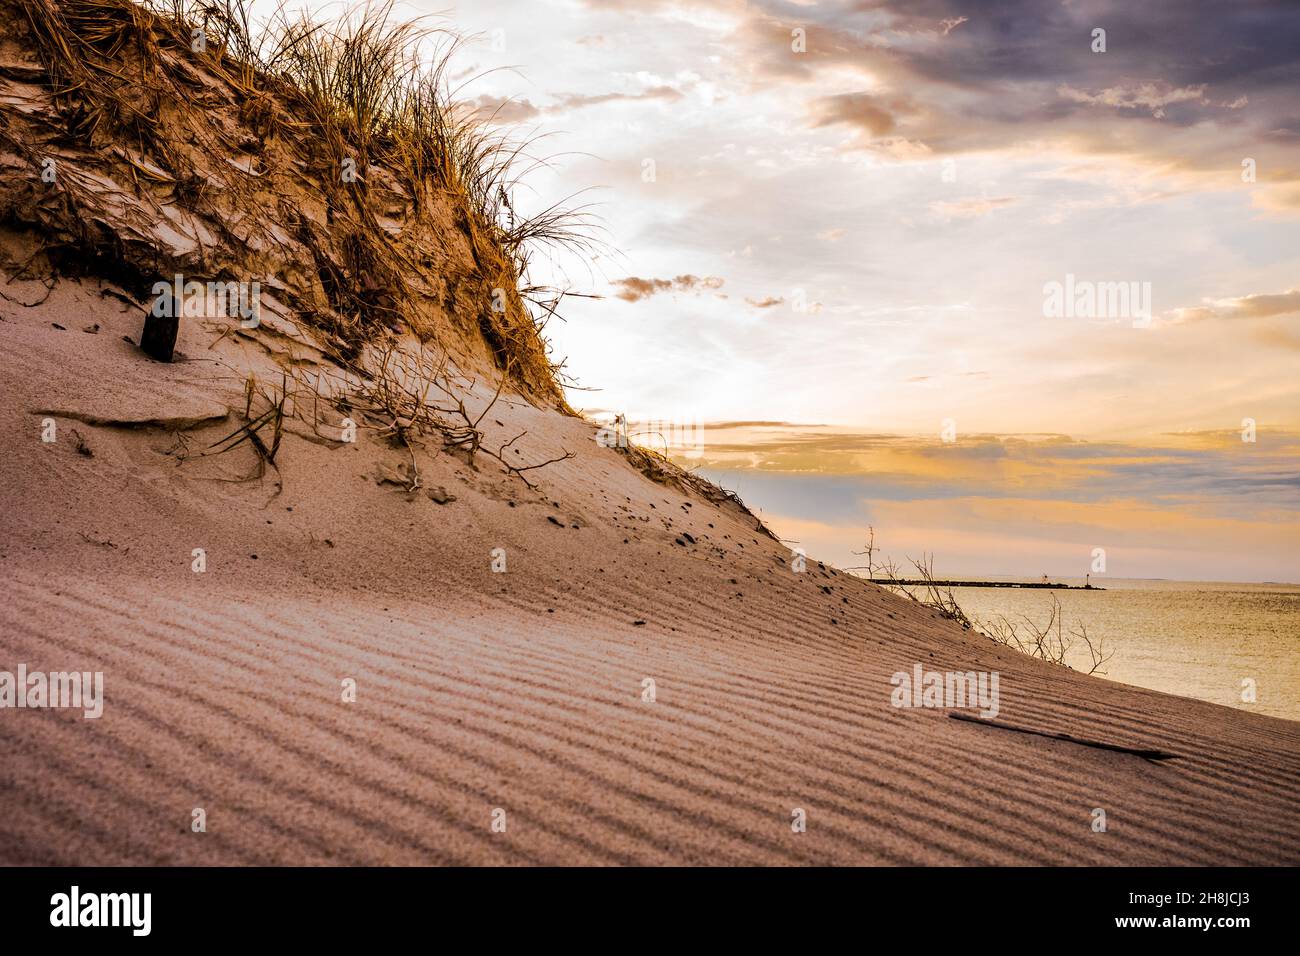 The constantly moving storm clouds and the swirling wind created the ripple affect in front of this sand dune. The erosion dunes can be beautiful. Stock Photo